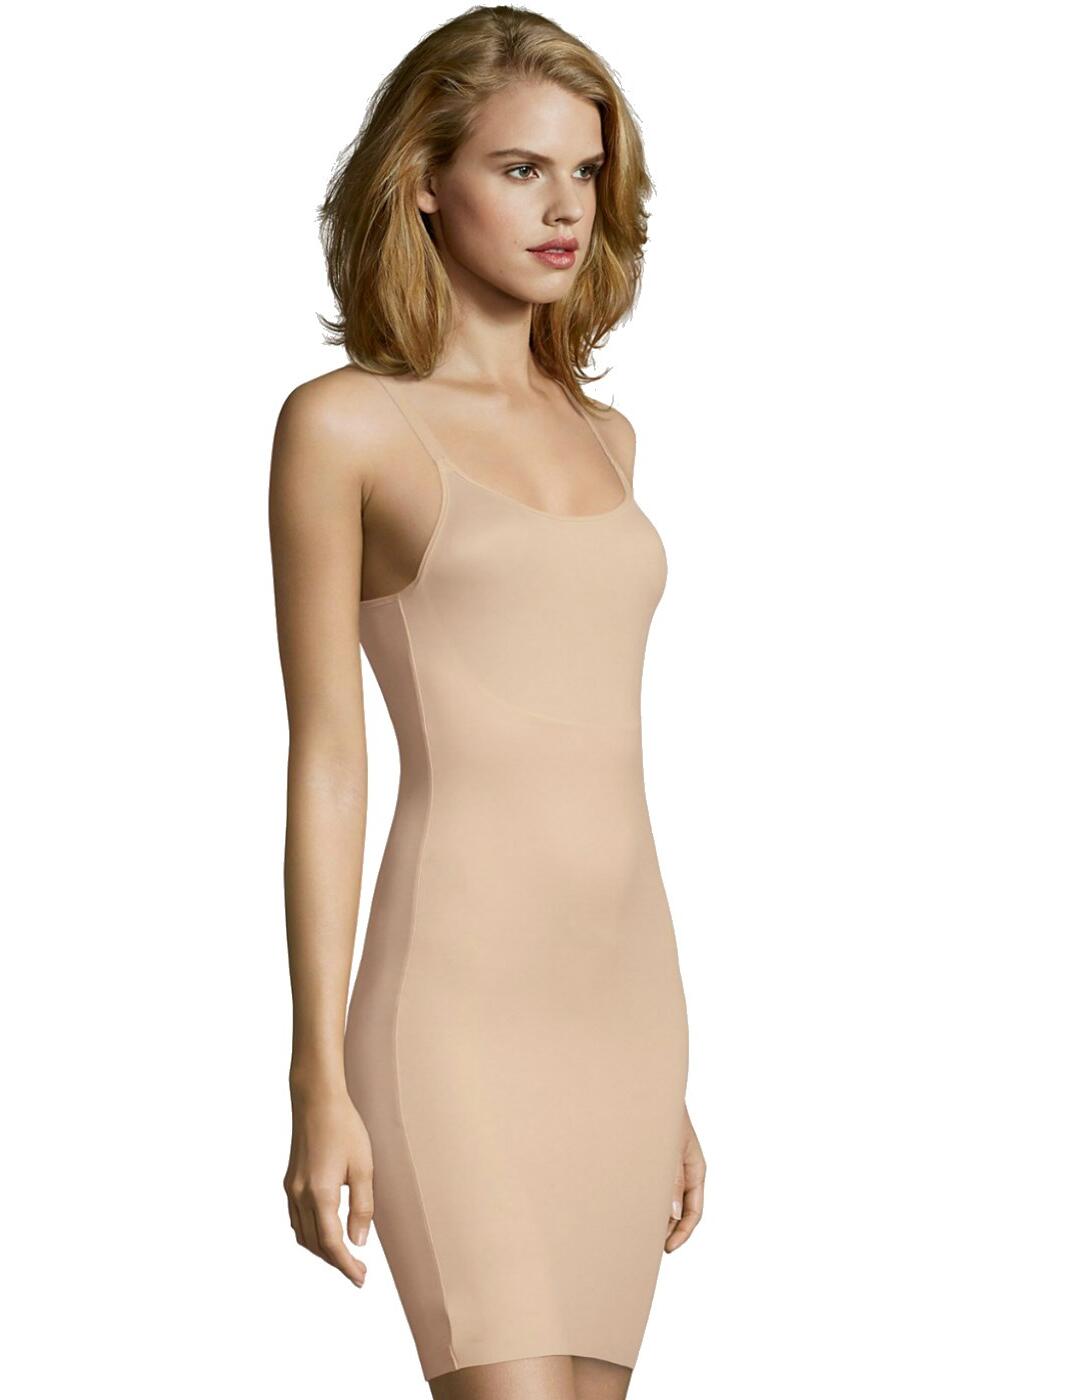 DM0039 Maidenform Cool Comfort Shaping Smoothing Slip - DM0039 Nude